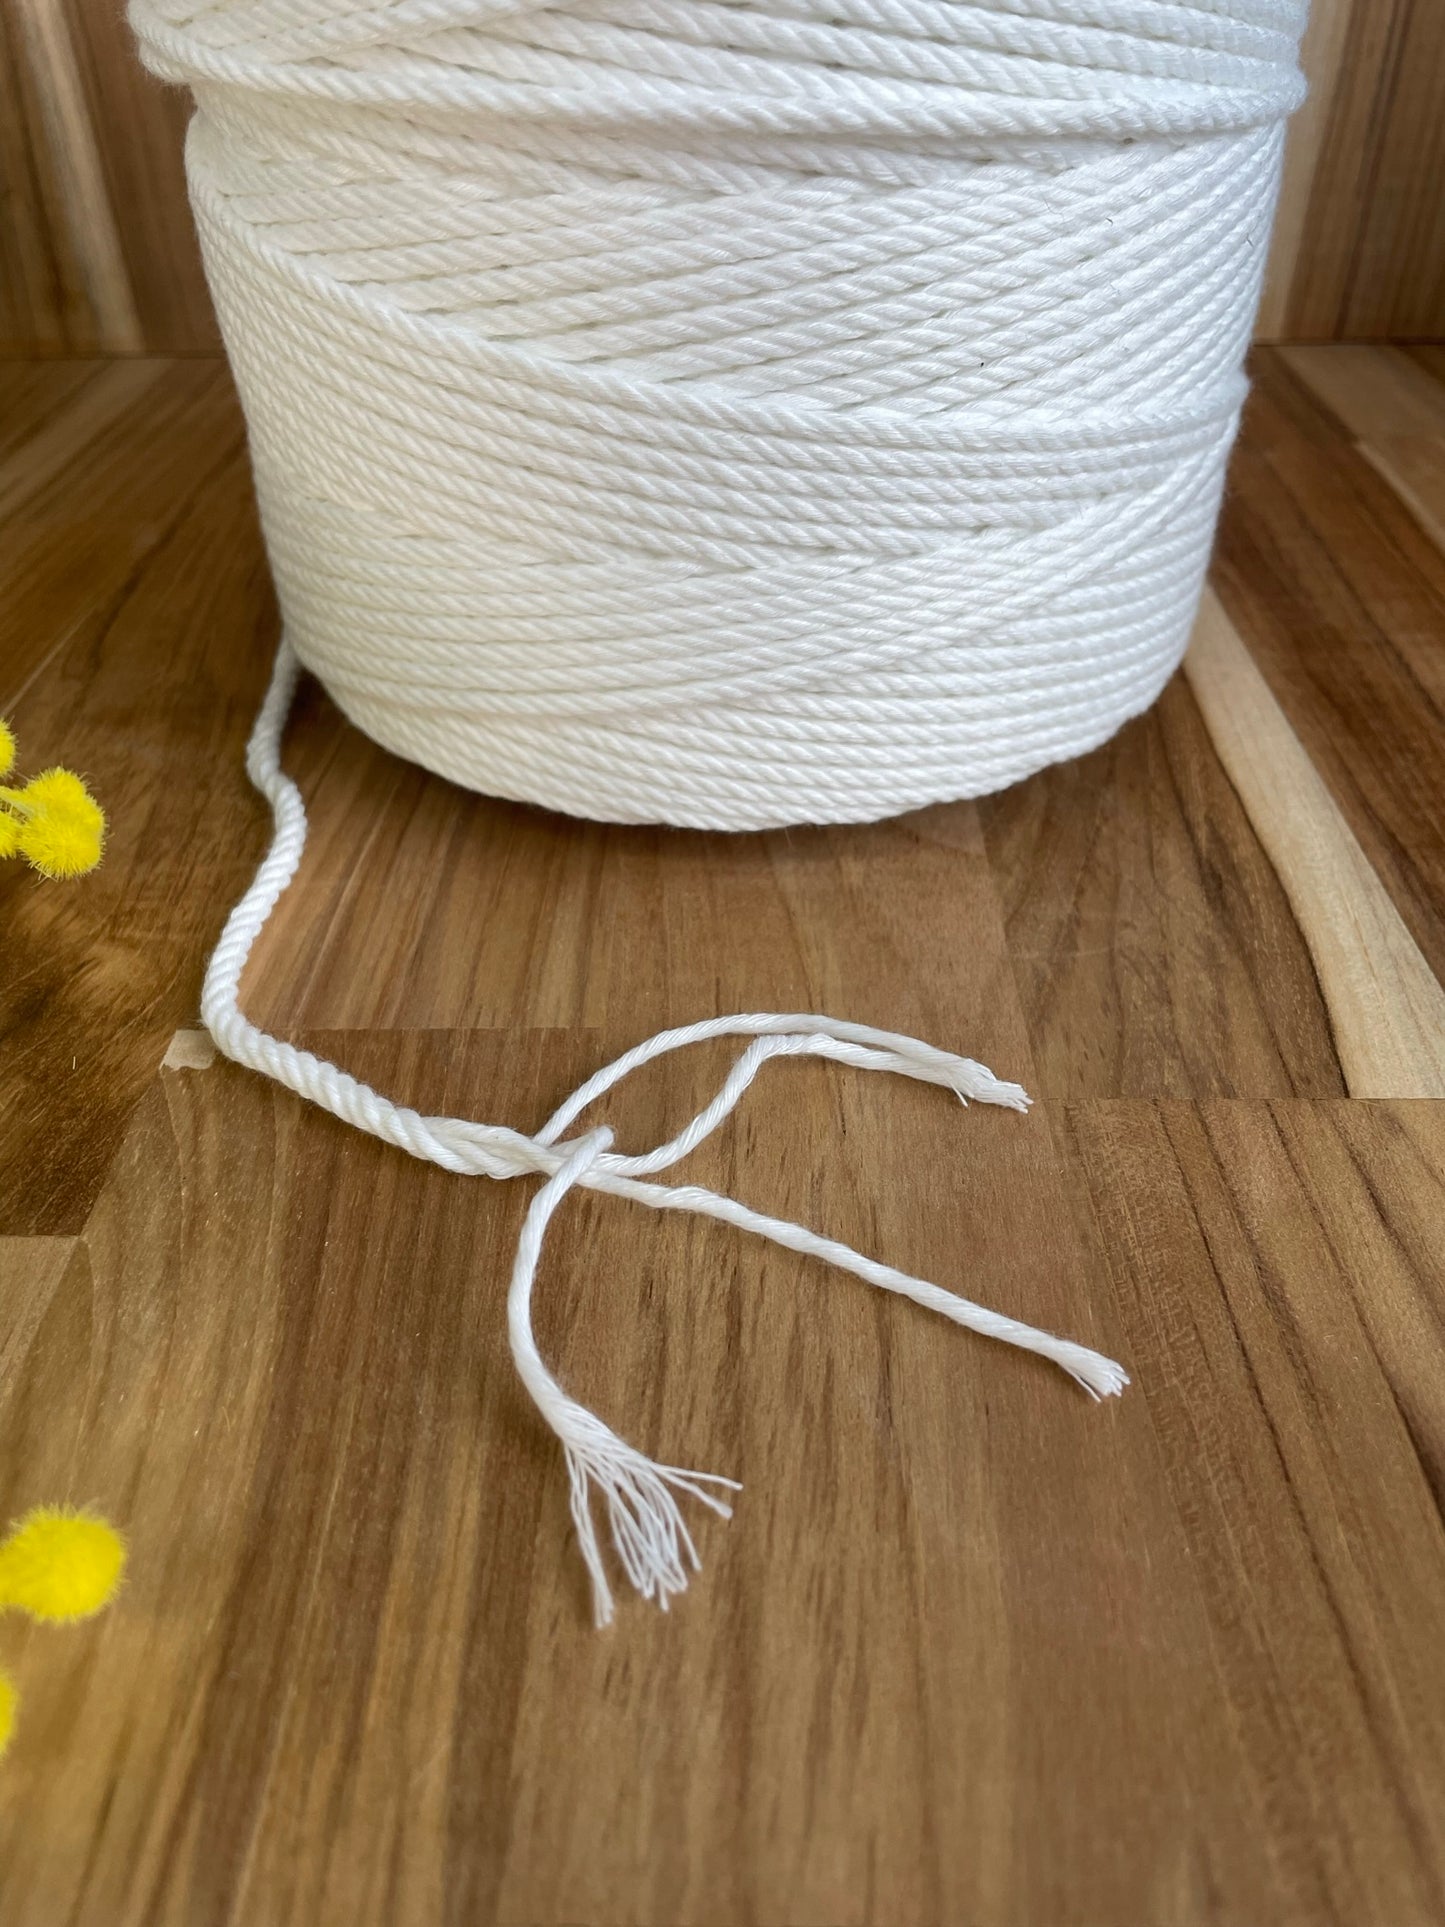 4mm Twisted Spun Polyester Rope 2 kg